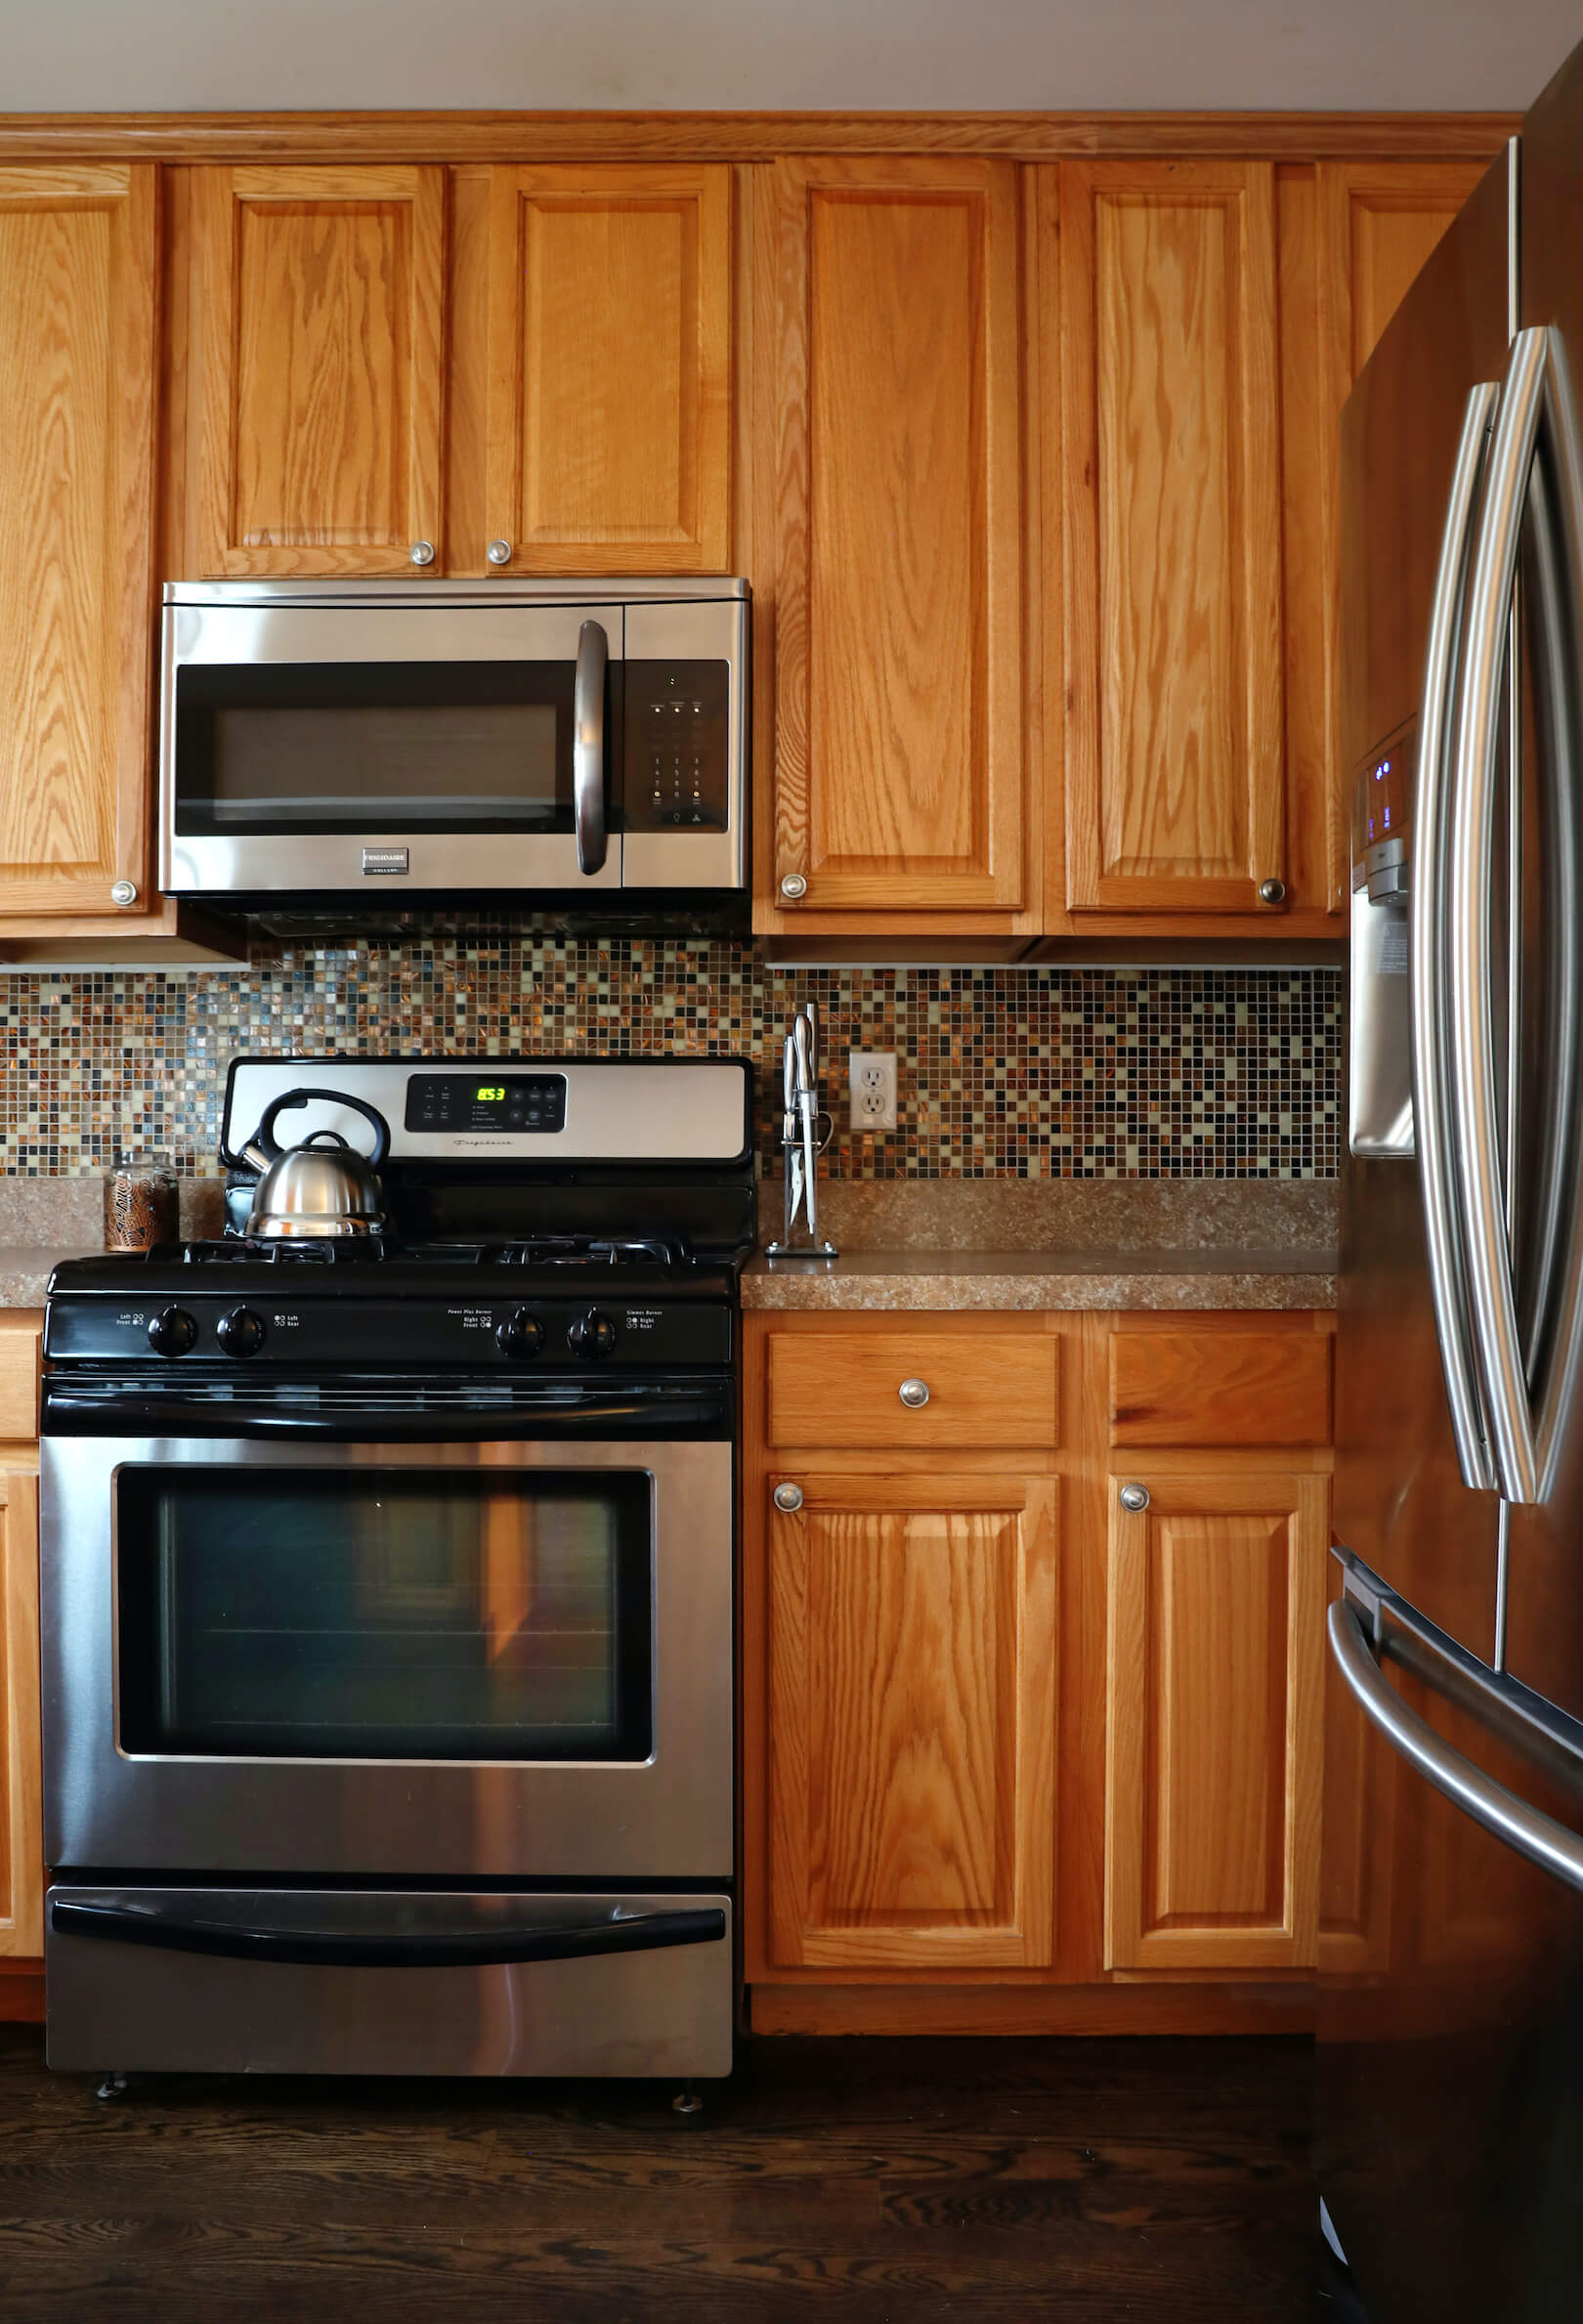 Before-Outdated cabinets to white shaker style